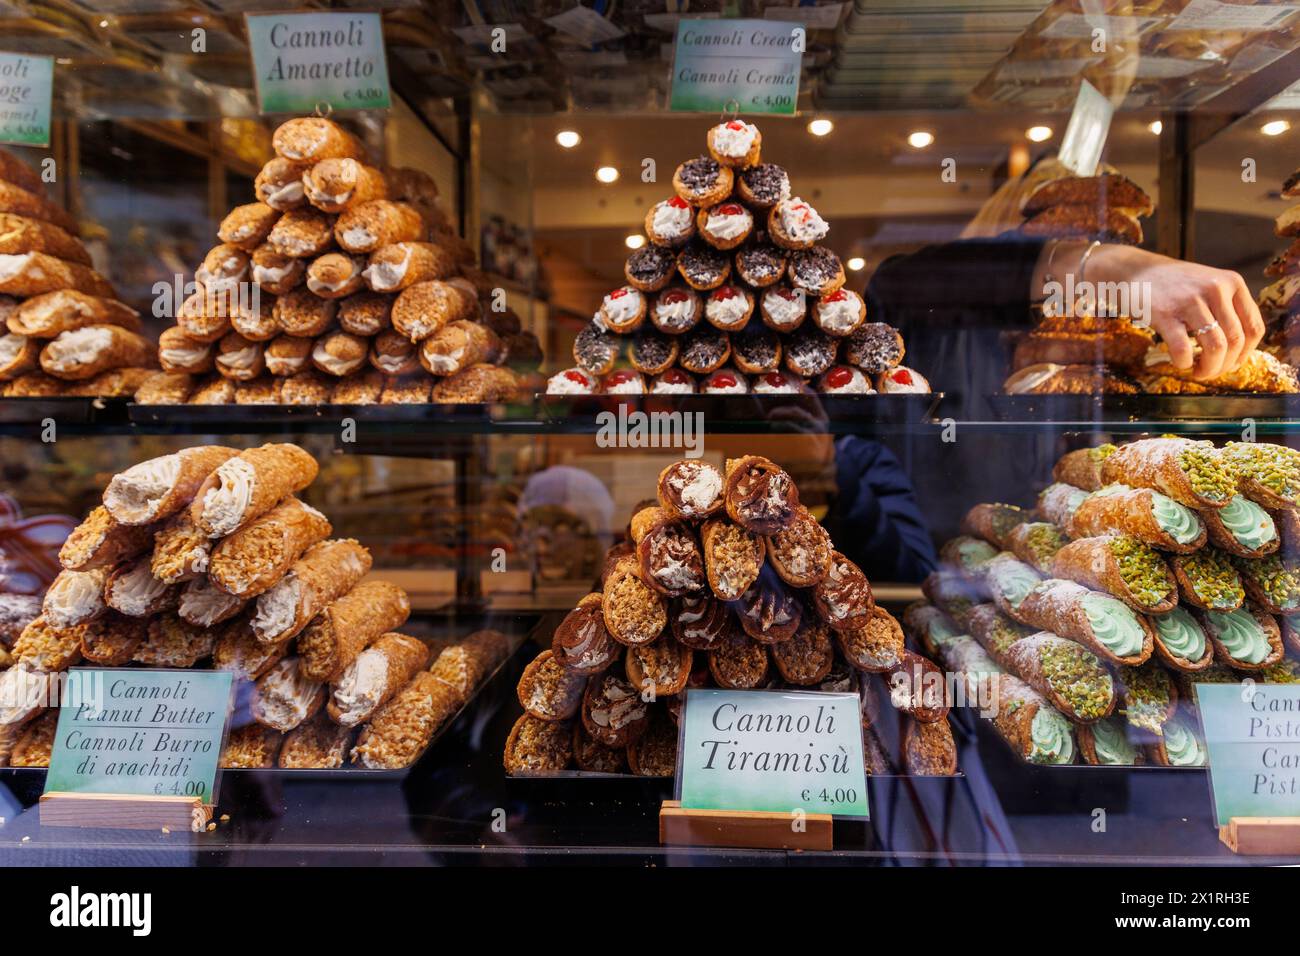 Venice, Italy, 2024.03.29: Delicious Cannoli Pastries with different toppings for Sale In a Cafe, Deli Or Bakery Stock Photo